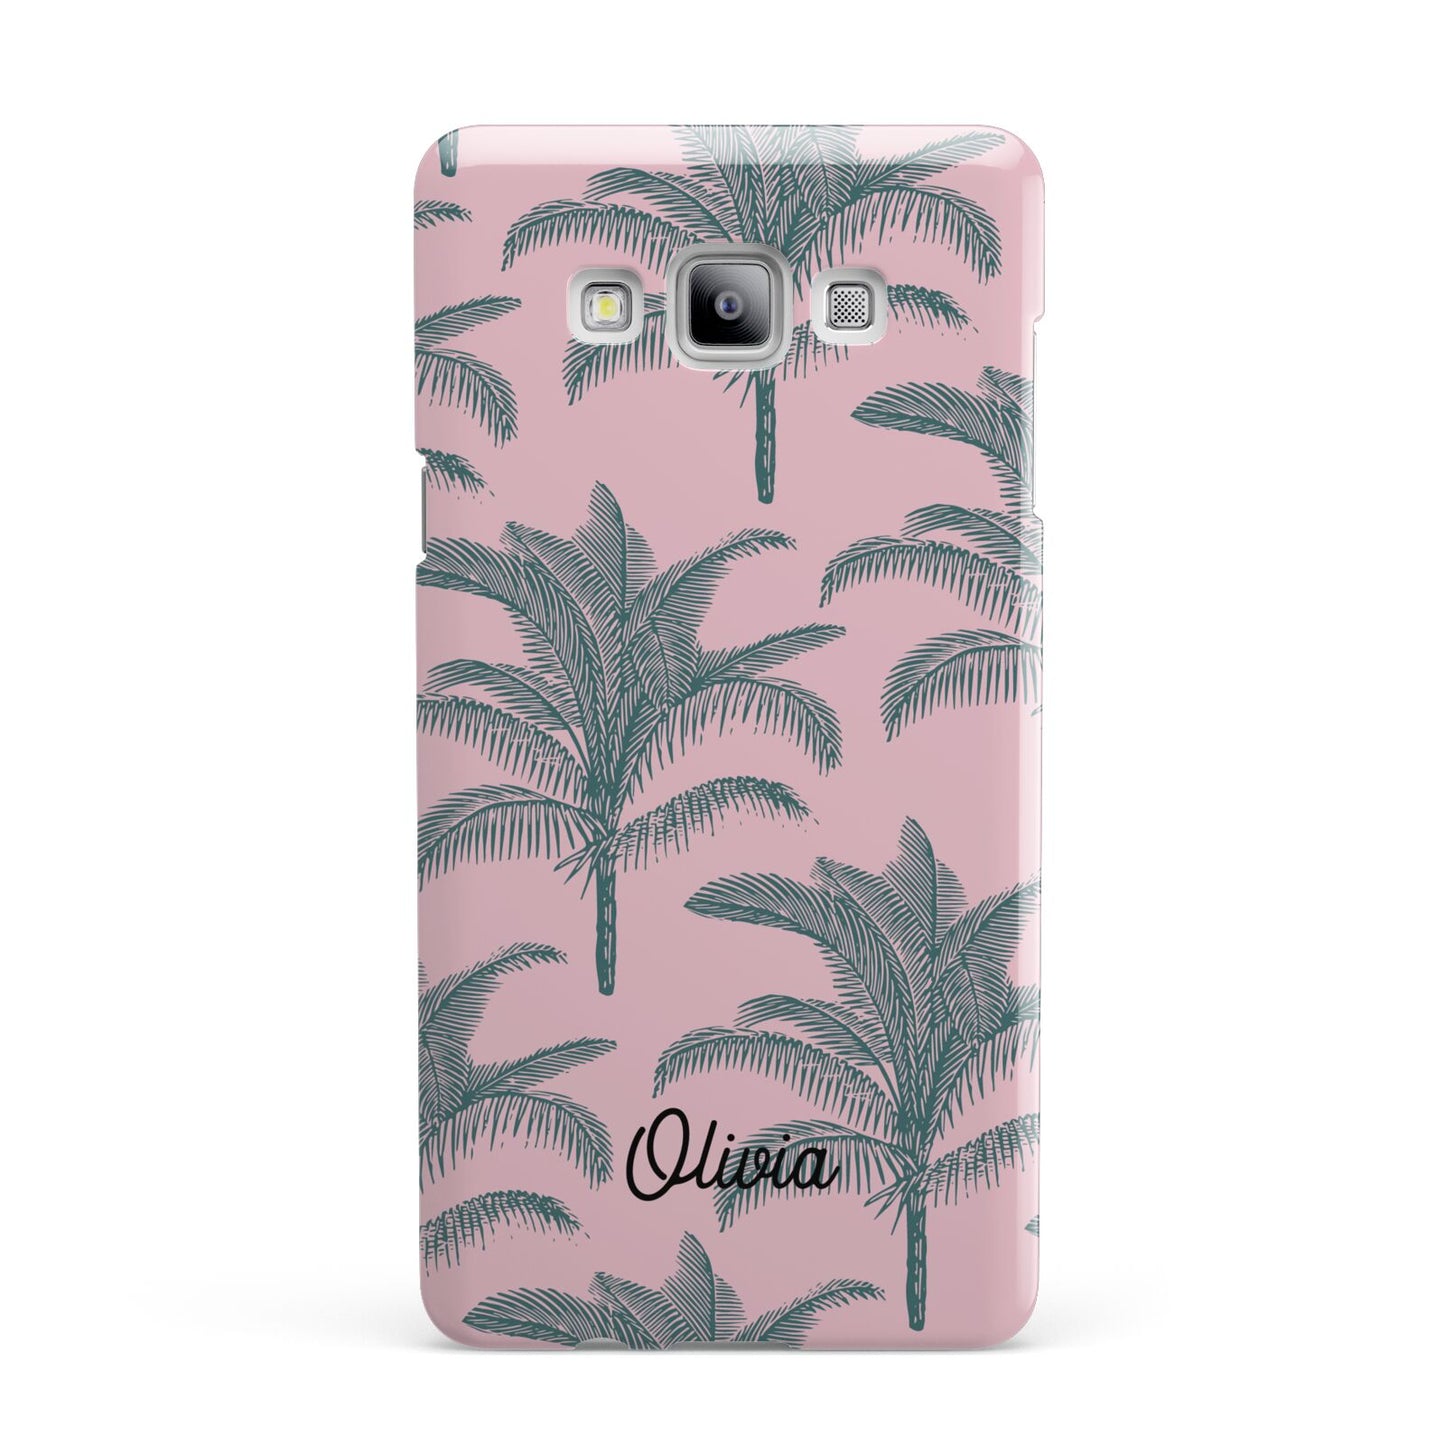 Personalised Palm Samsung Galaxy A7 2015 Case